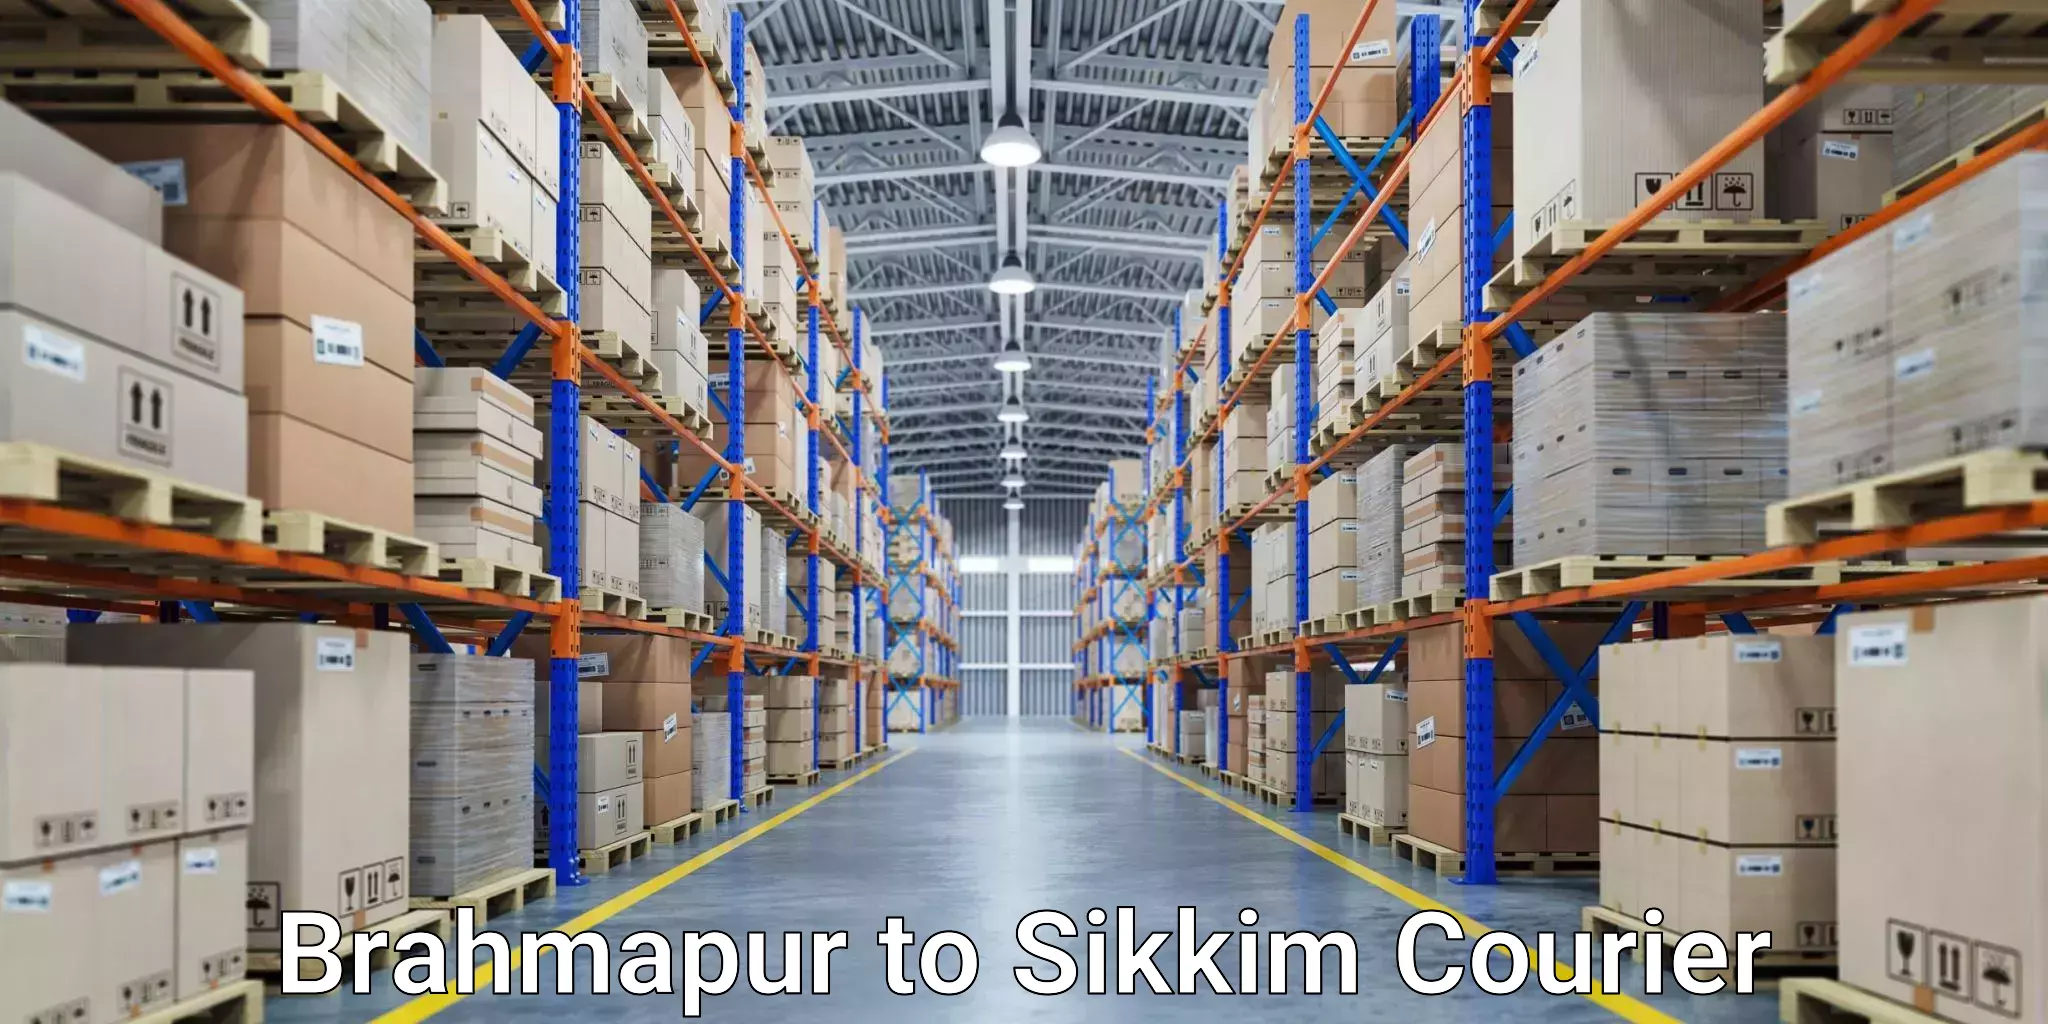 Global shipping networks Brahmapur to Sikkim